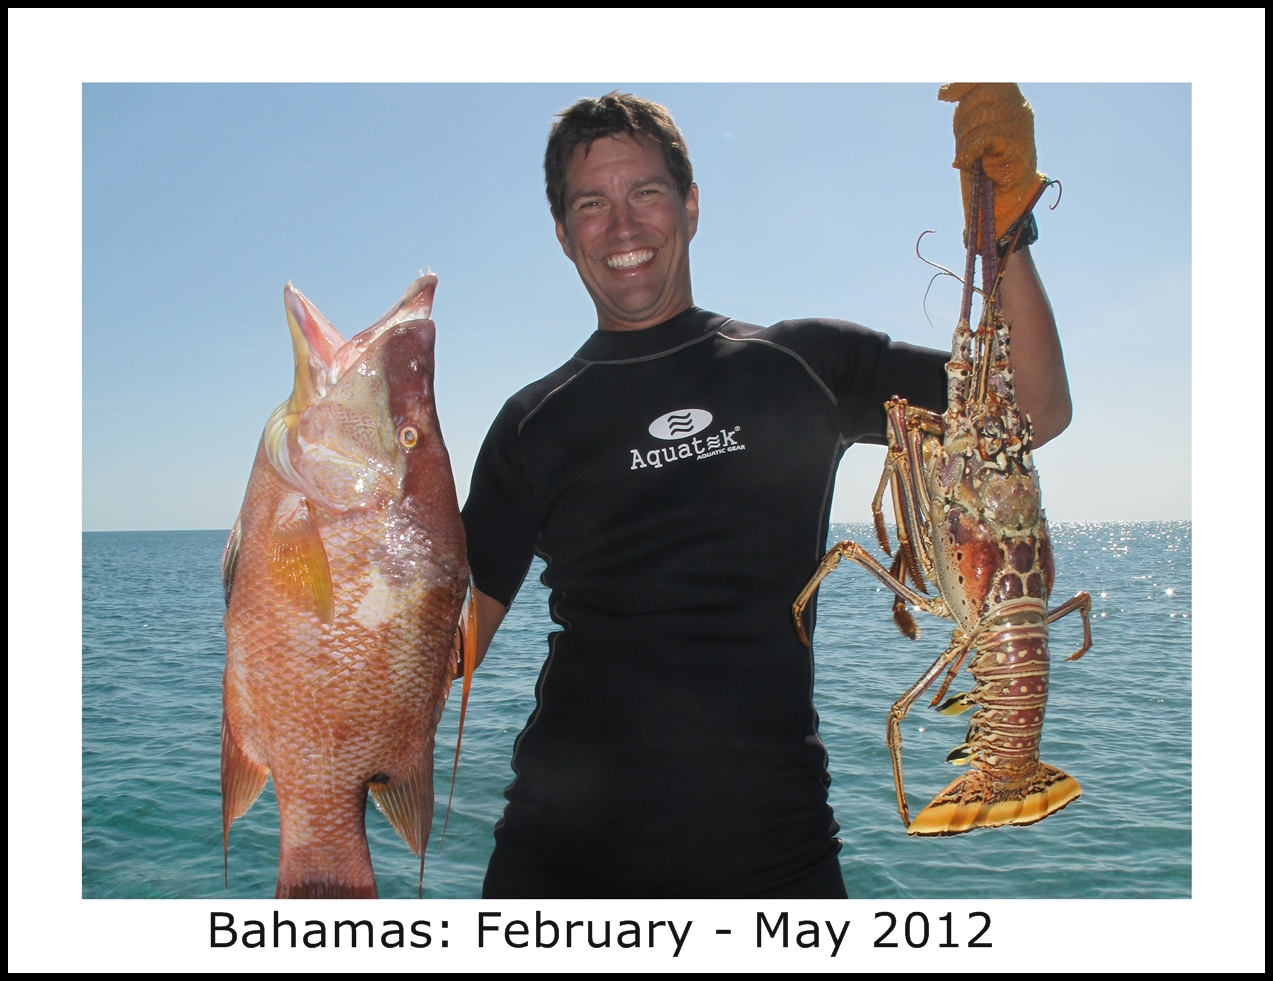 Photo_Gallery_Title_Pages/Bahamas_title.JPG